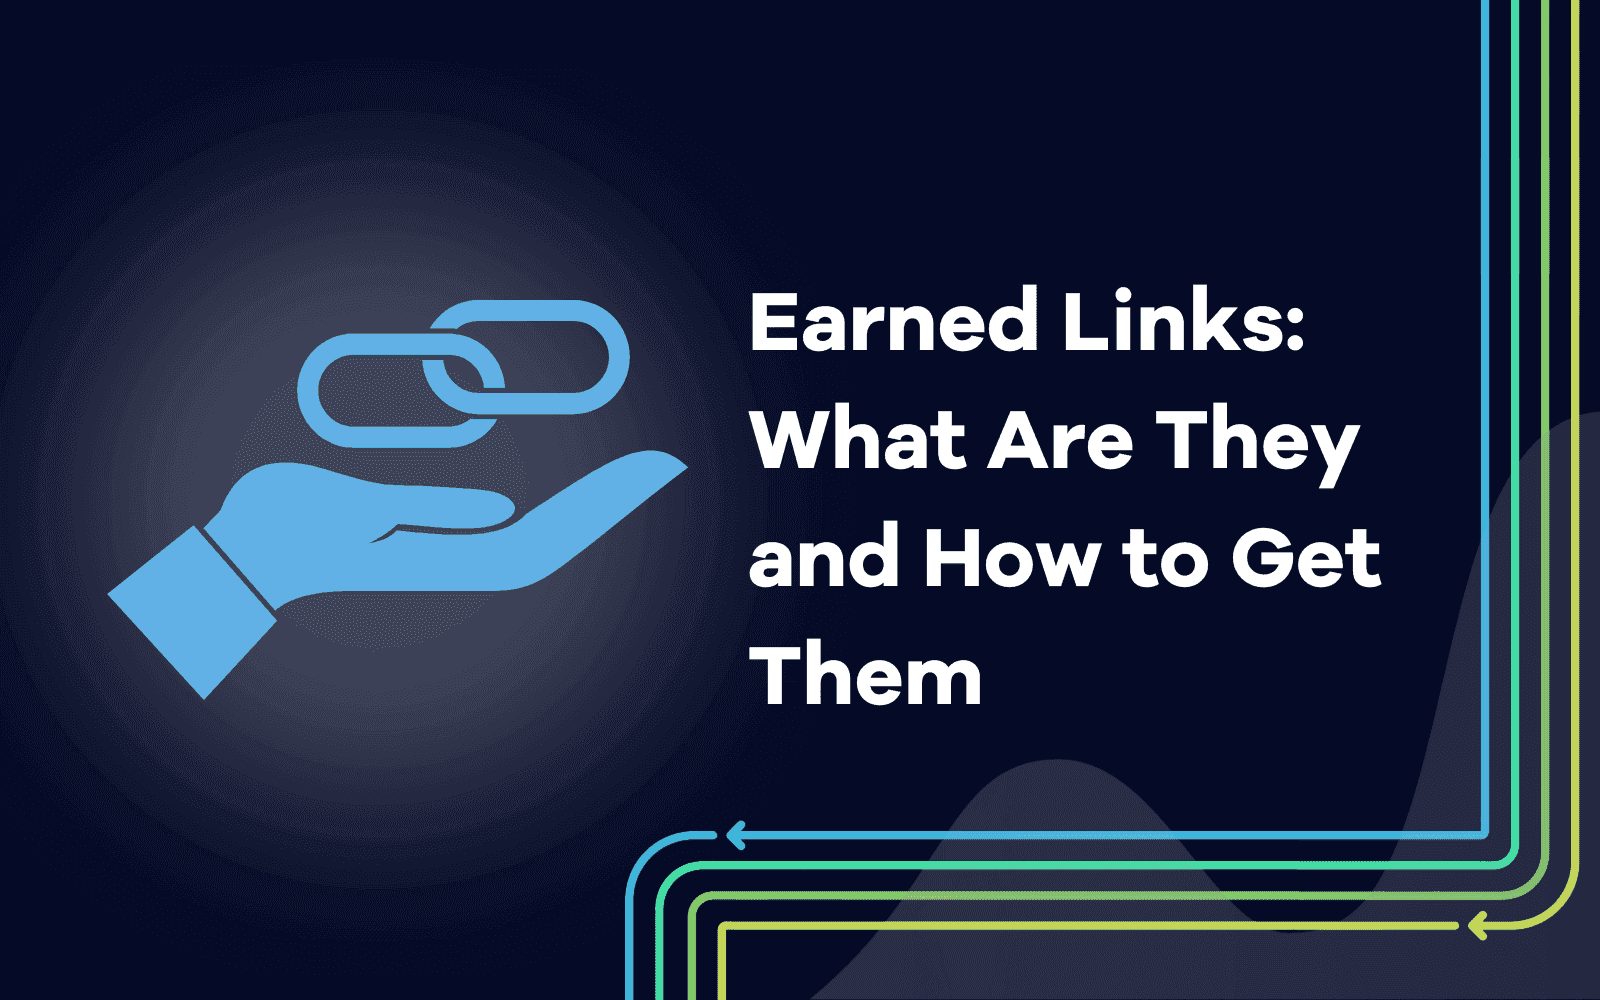 Earned Links What Are They and How to Get Them